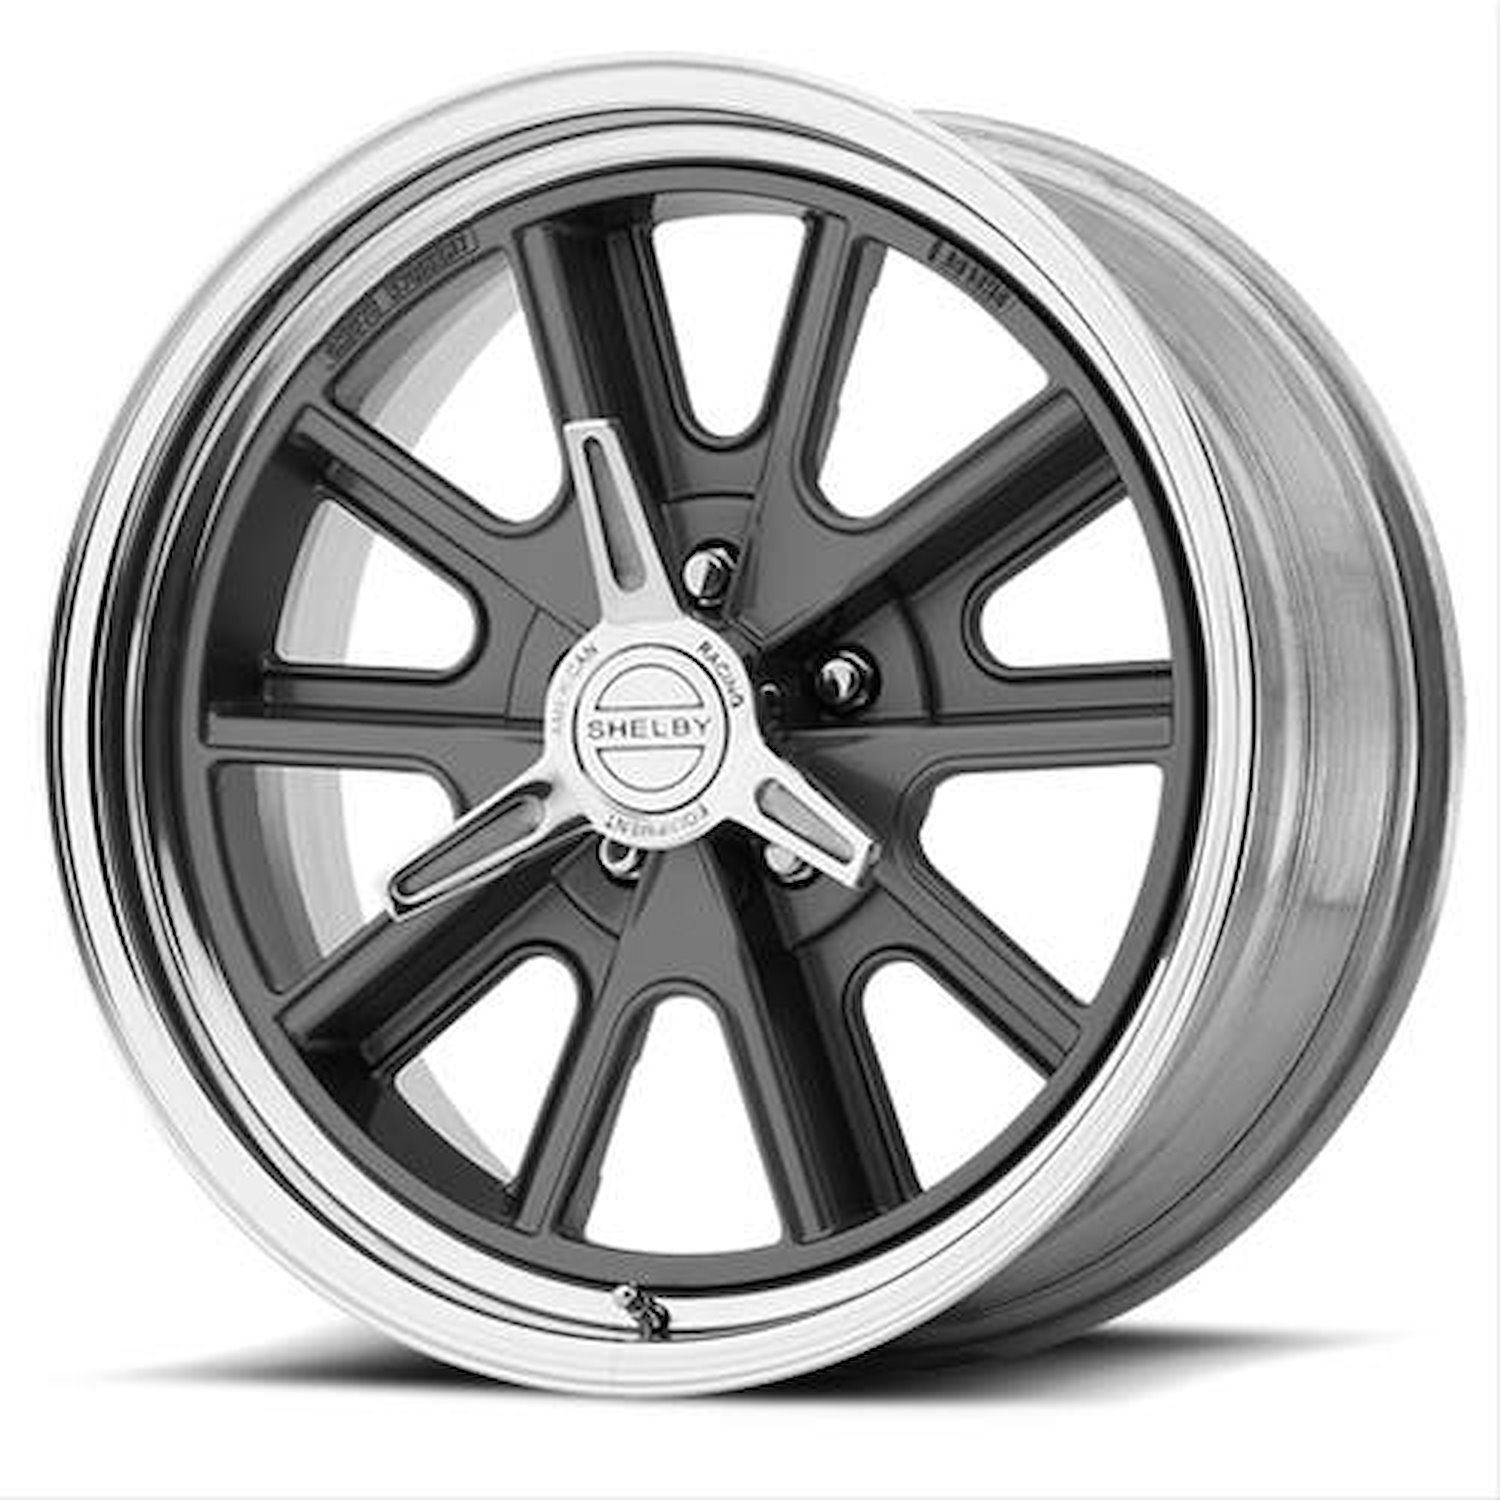 AMERICAN RACING 427 SHELBY COBRA TWO-PIECE MAG GRAY CENTER POLISHED BARREL 15 x 8 5X4.75 0 4.50